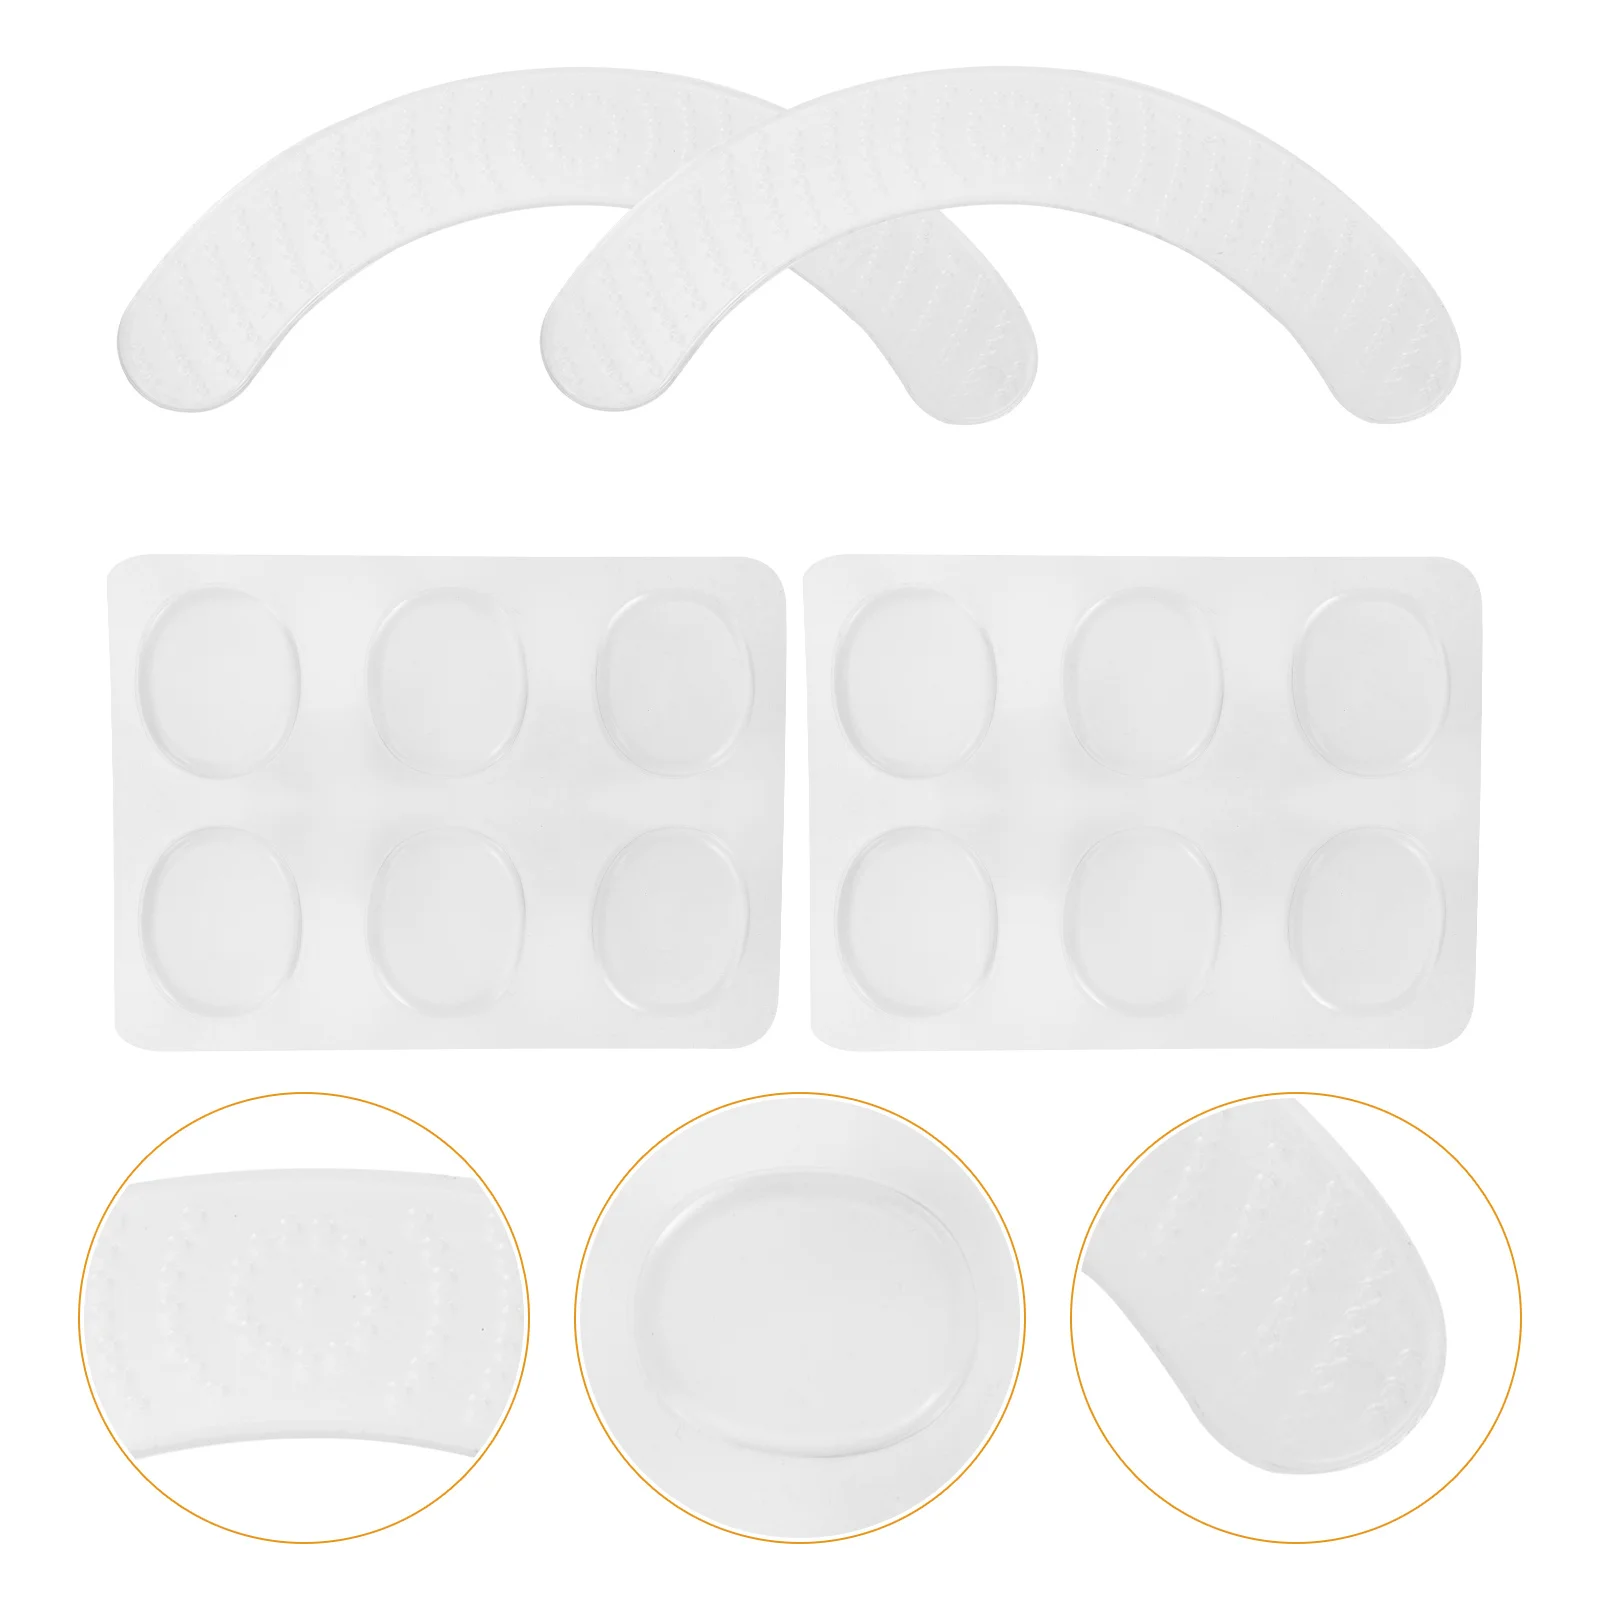 

Drum Pads Mute Dampening Pad Bass Silencer Dampeners Accessories Cushions Mats Damper Head Silicone Muffler Quiet Silencers